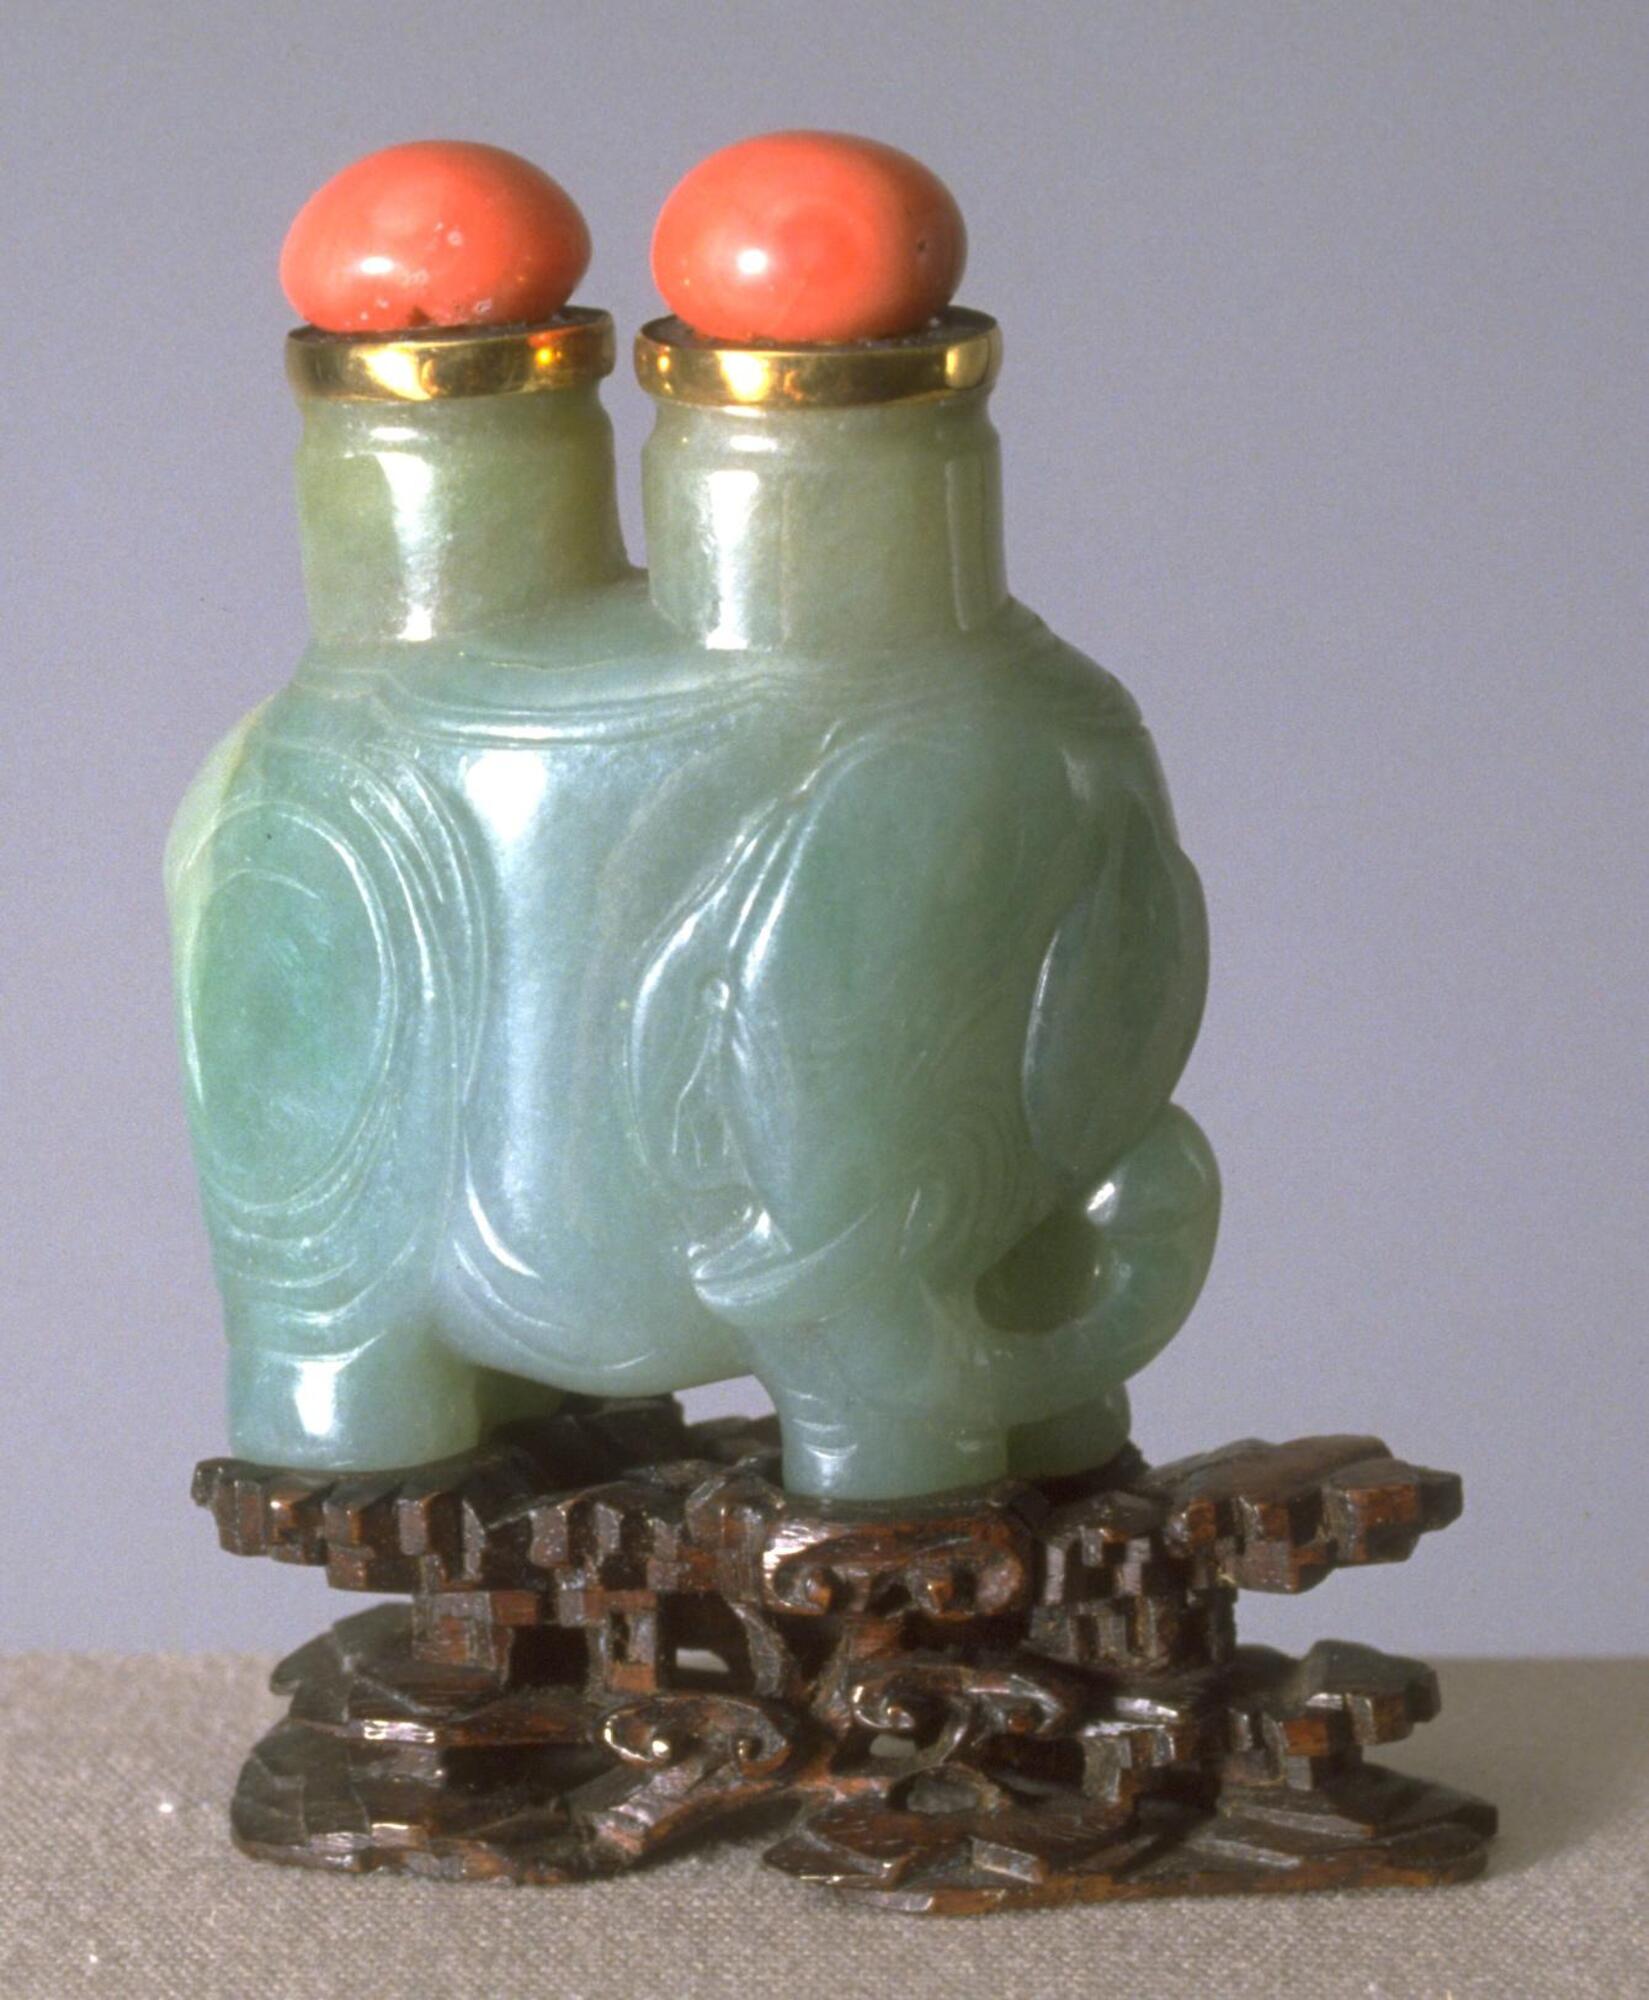 A bluish-green nephrite jade snuff bottle in the shape of an elephant with its head positioned to the side. On the back of the elephant are two openings with gold rims and oval coral stoppers. &nbsp;Carved on the sides of the elephant are &nbsp;circles that show the creases on the elephants body.